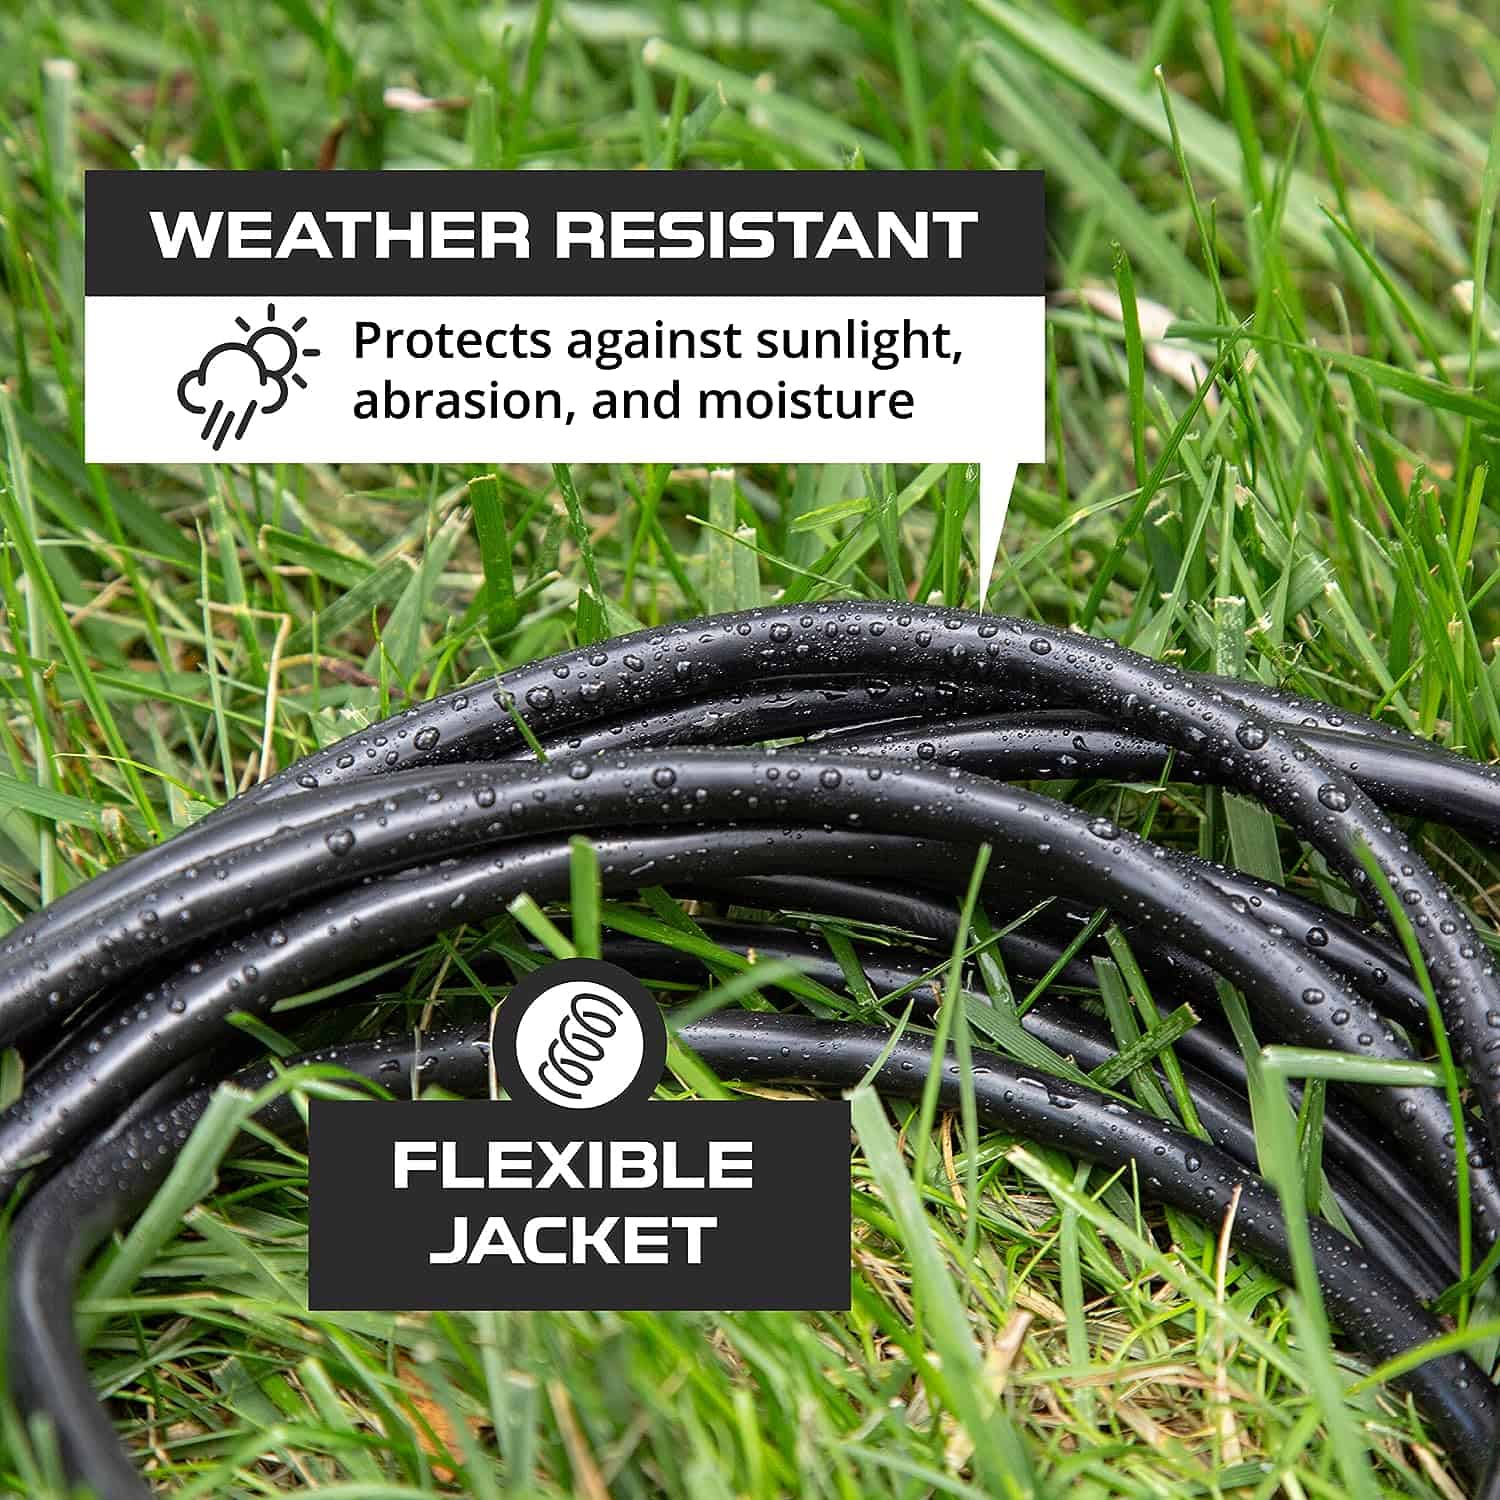 Iron Forge 50 Ft Extension Cord 16 3 Black 50 Foot Extension Cord Indoor Outdoor Use 3 Prong Weatherproof Exterior Extension Cord Great for Garden 5